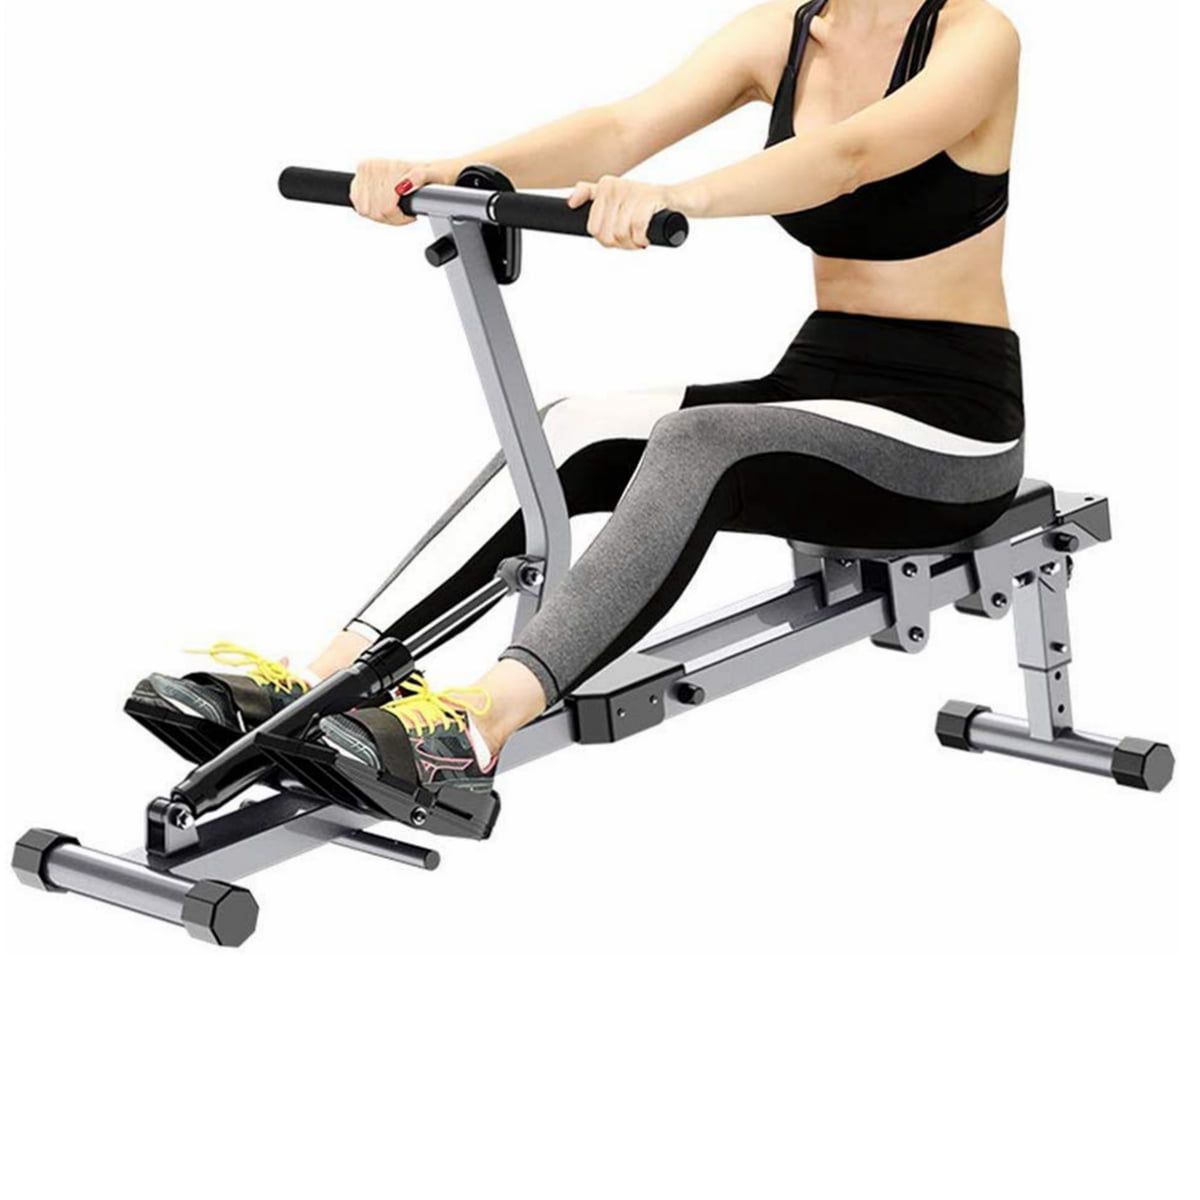 LCD Rowing Machine Rower 12 Level Adjustable Cardio Exercise Fitness Home Gym 